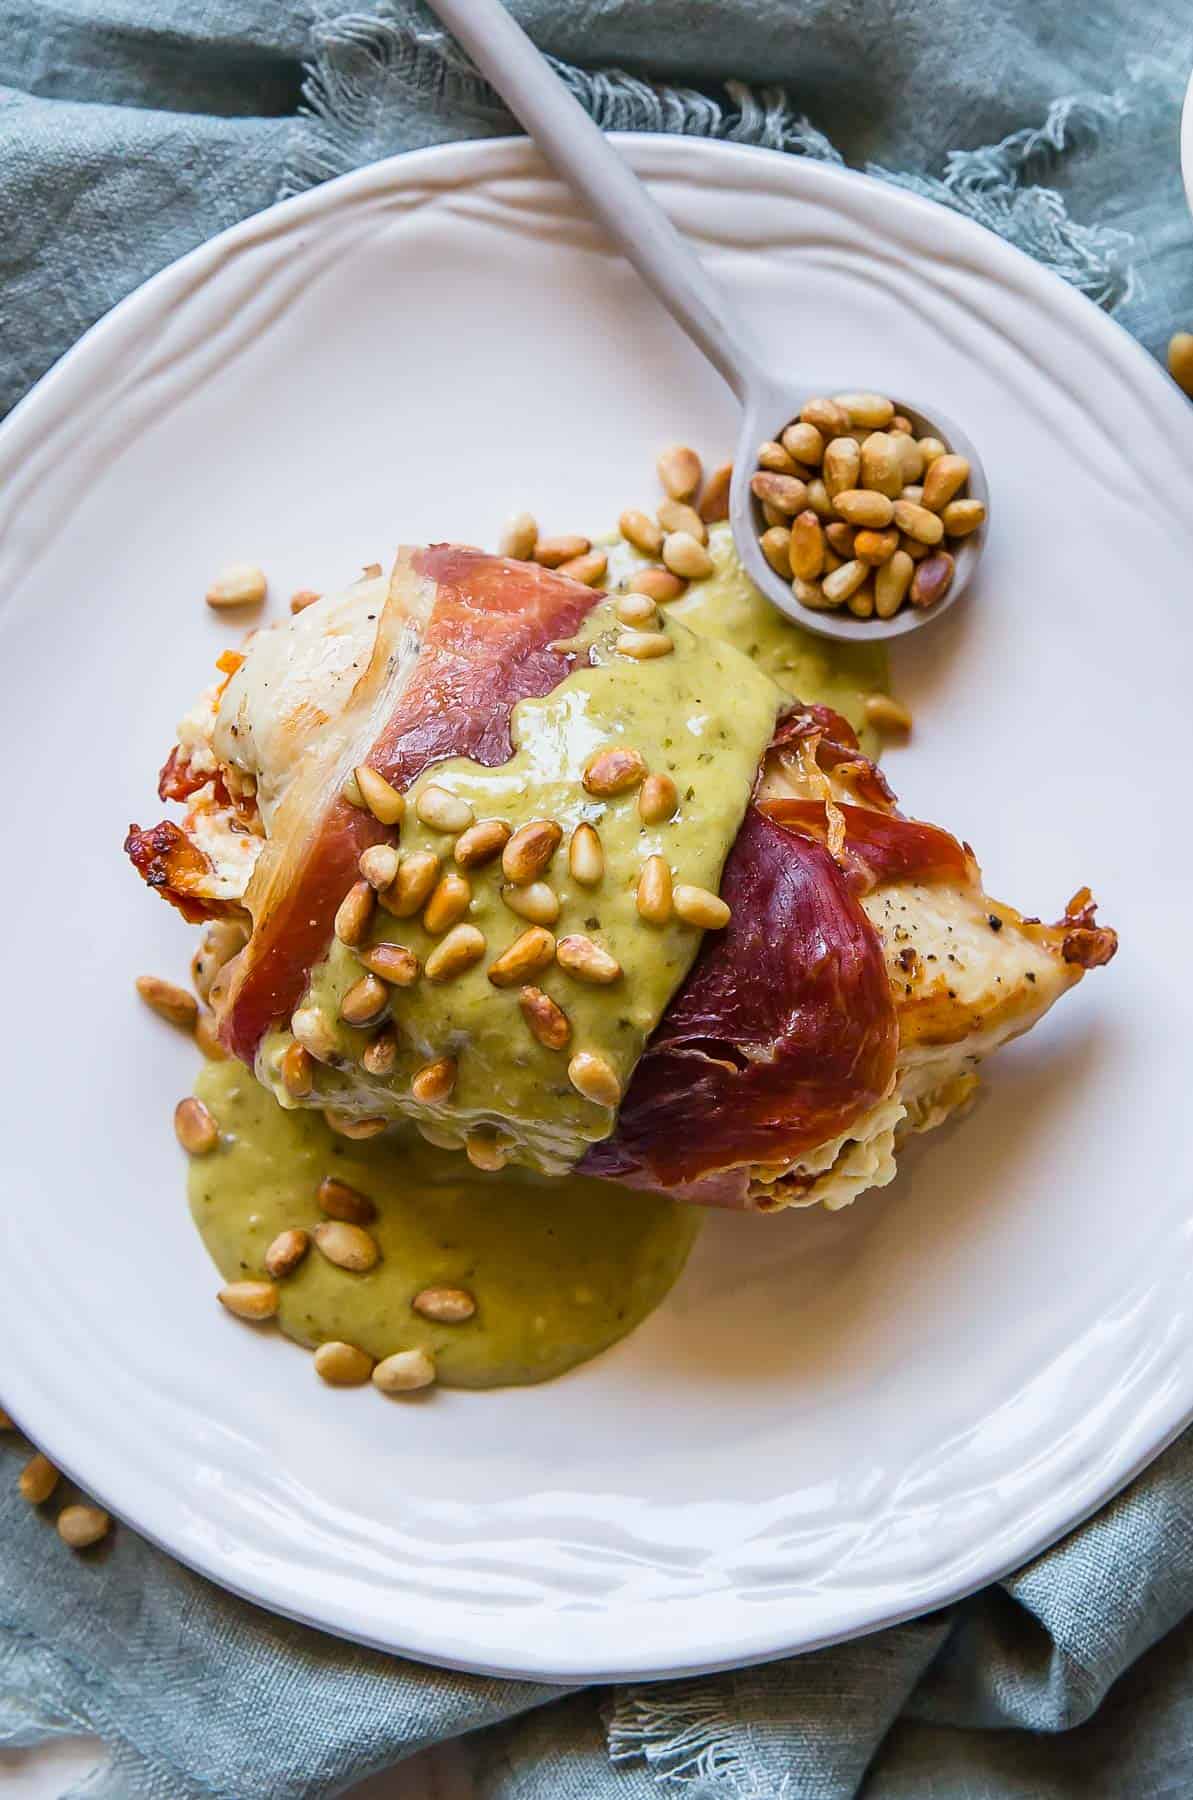 A serving plate with a chicken breast that is stuffed and then wrapped in prosciutto and topped with pesto cream sauce and toasted pine nuts.